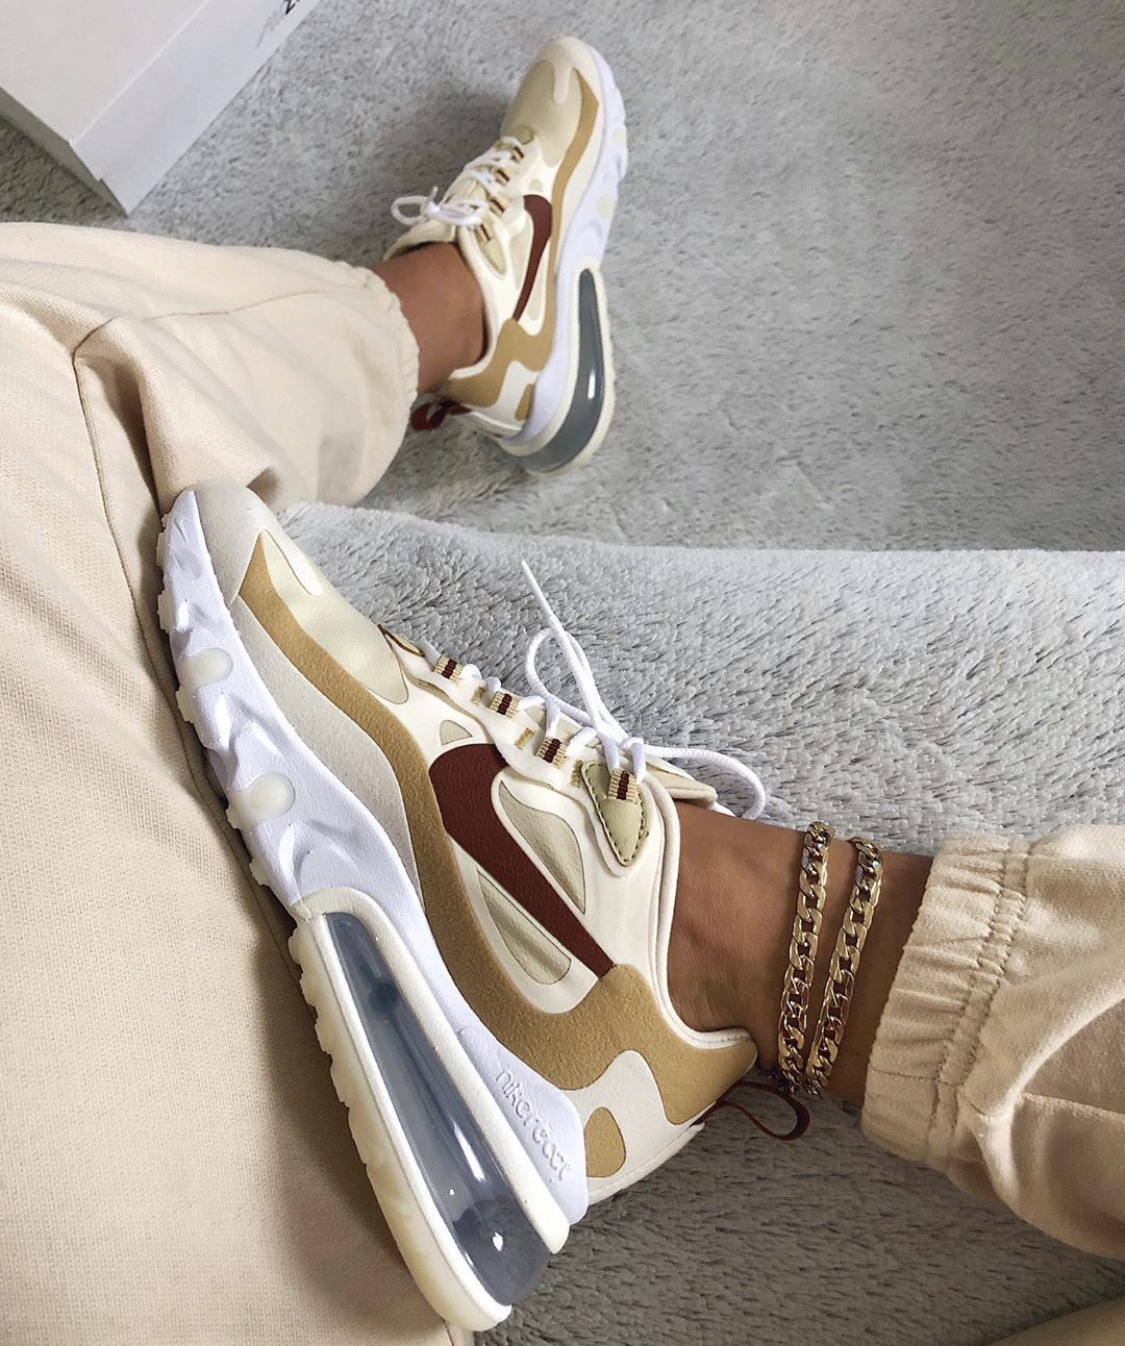 Bomb_Product_of_the_Day_Nike_Air_Max_270_React_Sneakers